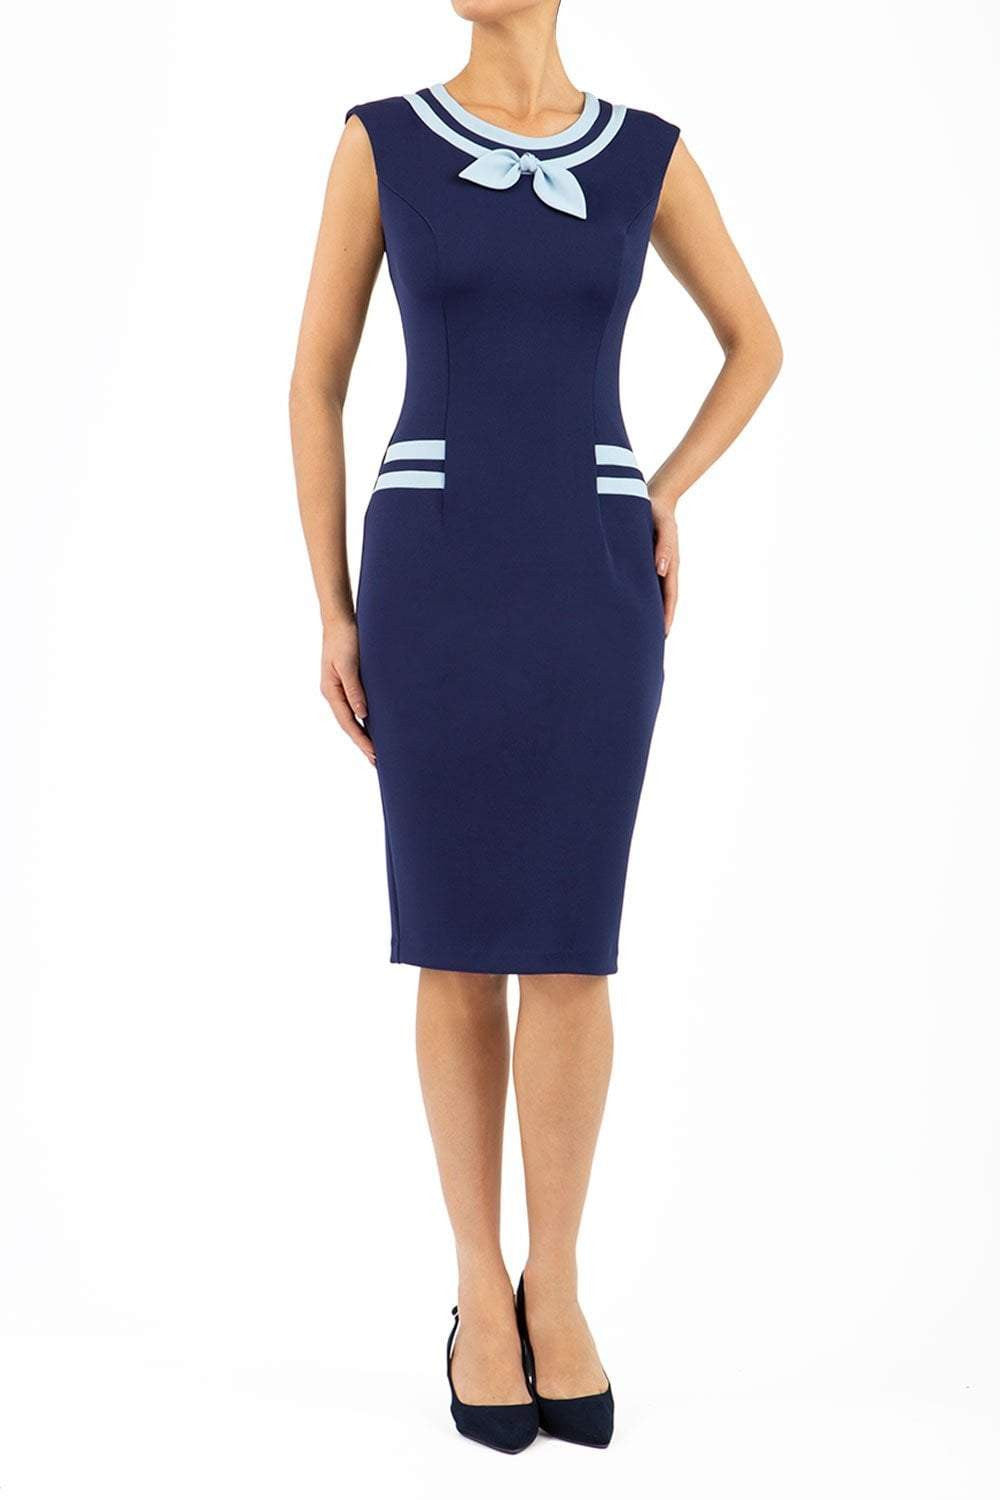 model wearing diva catwalk navy blue tempo pencil dress with pocket detail and rounded neckline with bow detail front